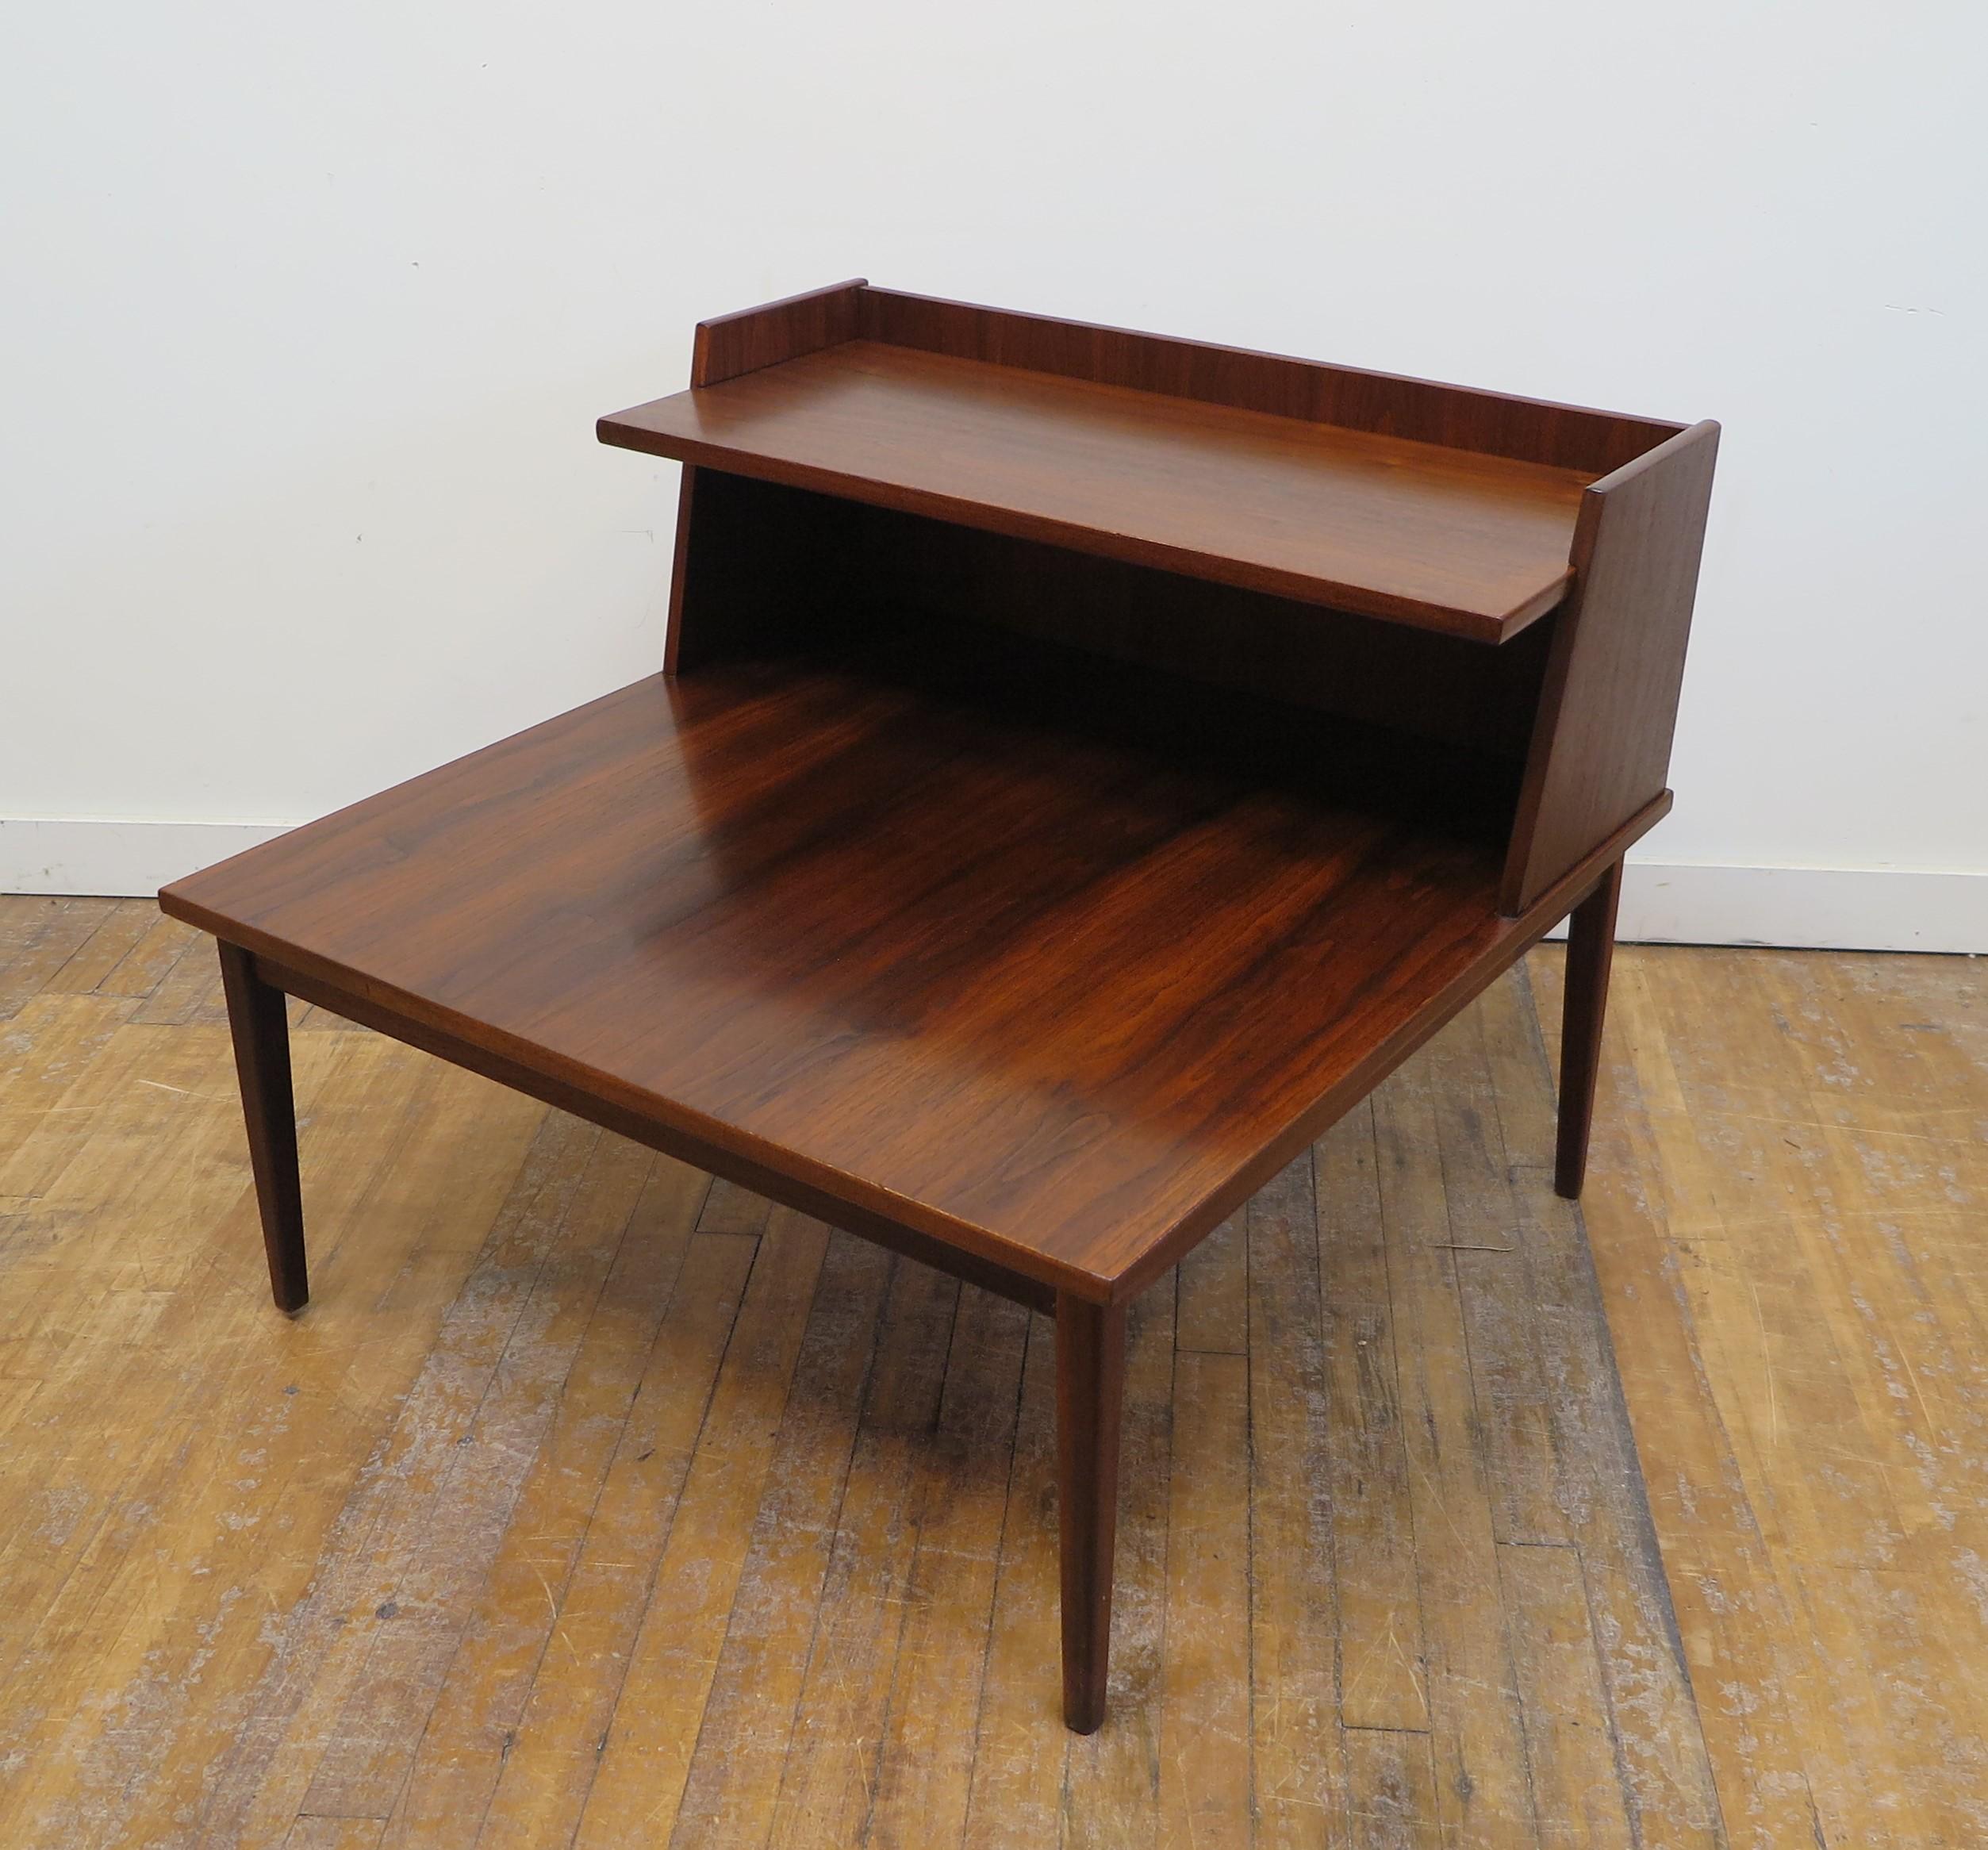 Danish Modern Teak Mid Century side table. Mid-Century Modern Side table with an upper shelf. Very nice shelfed side table in teak. The lower main shelf is 16 inches high and the rear upper shelf is 24 inches high. This is larger footprint table